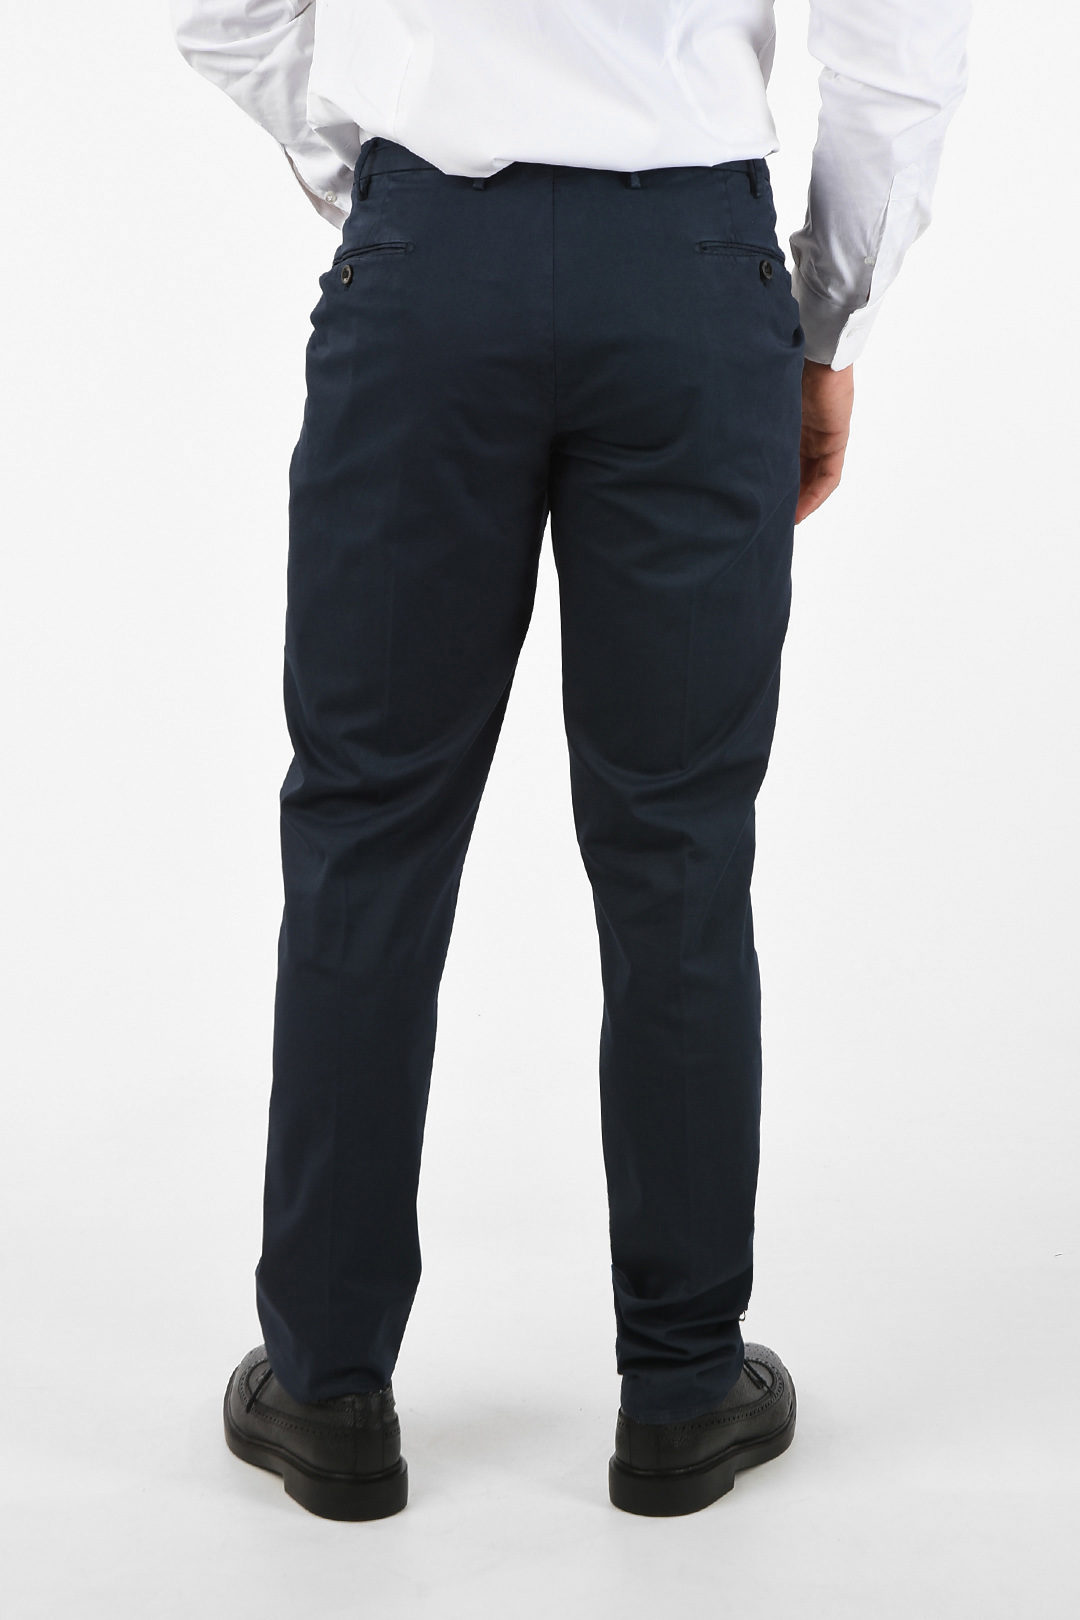 Incotex Tight Fit chinos men - Glamood Outlet